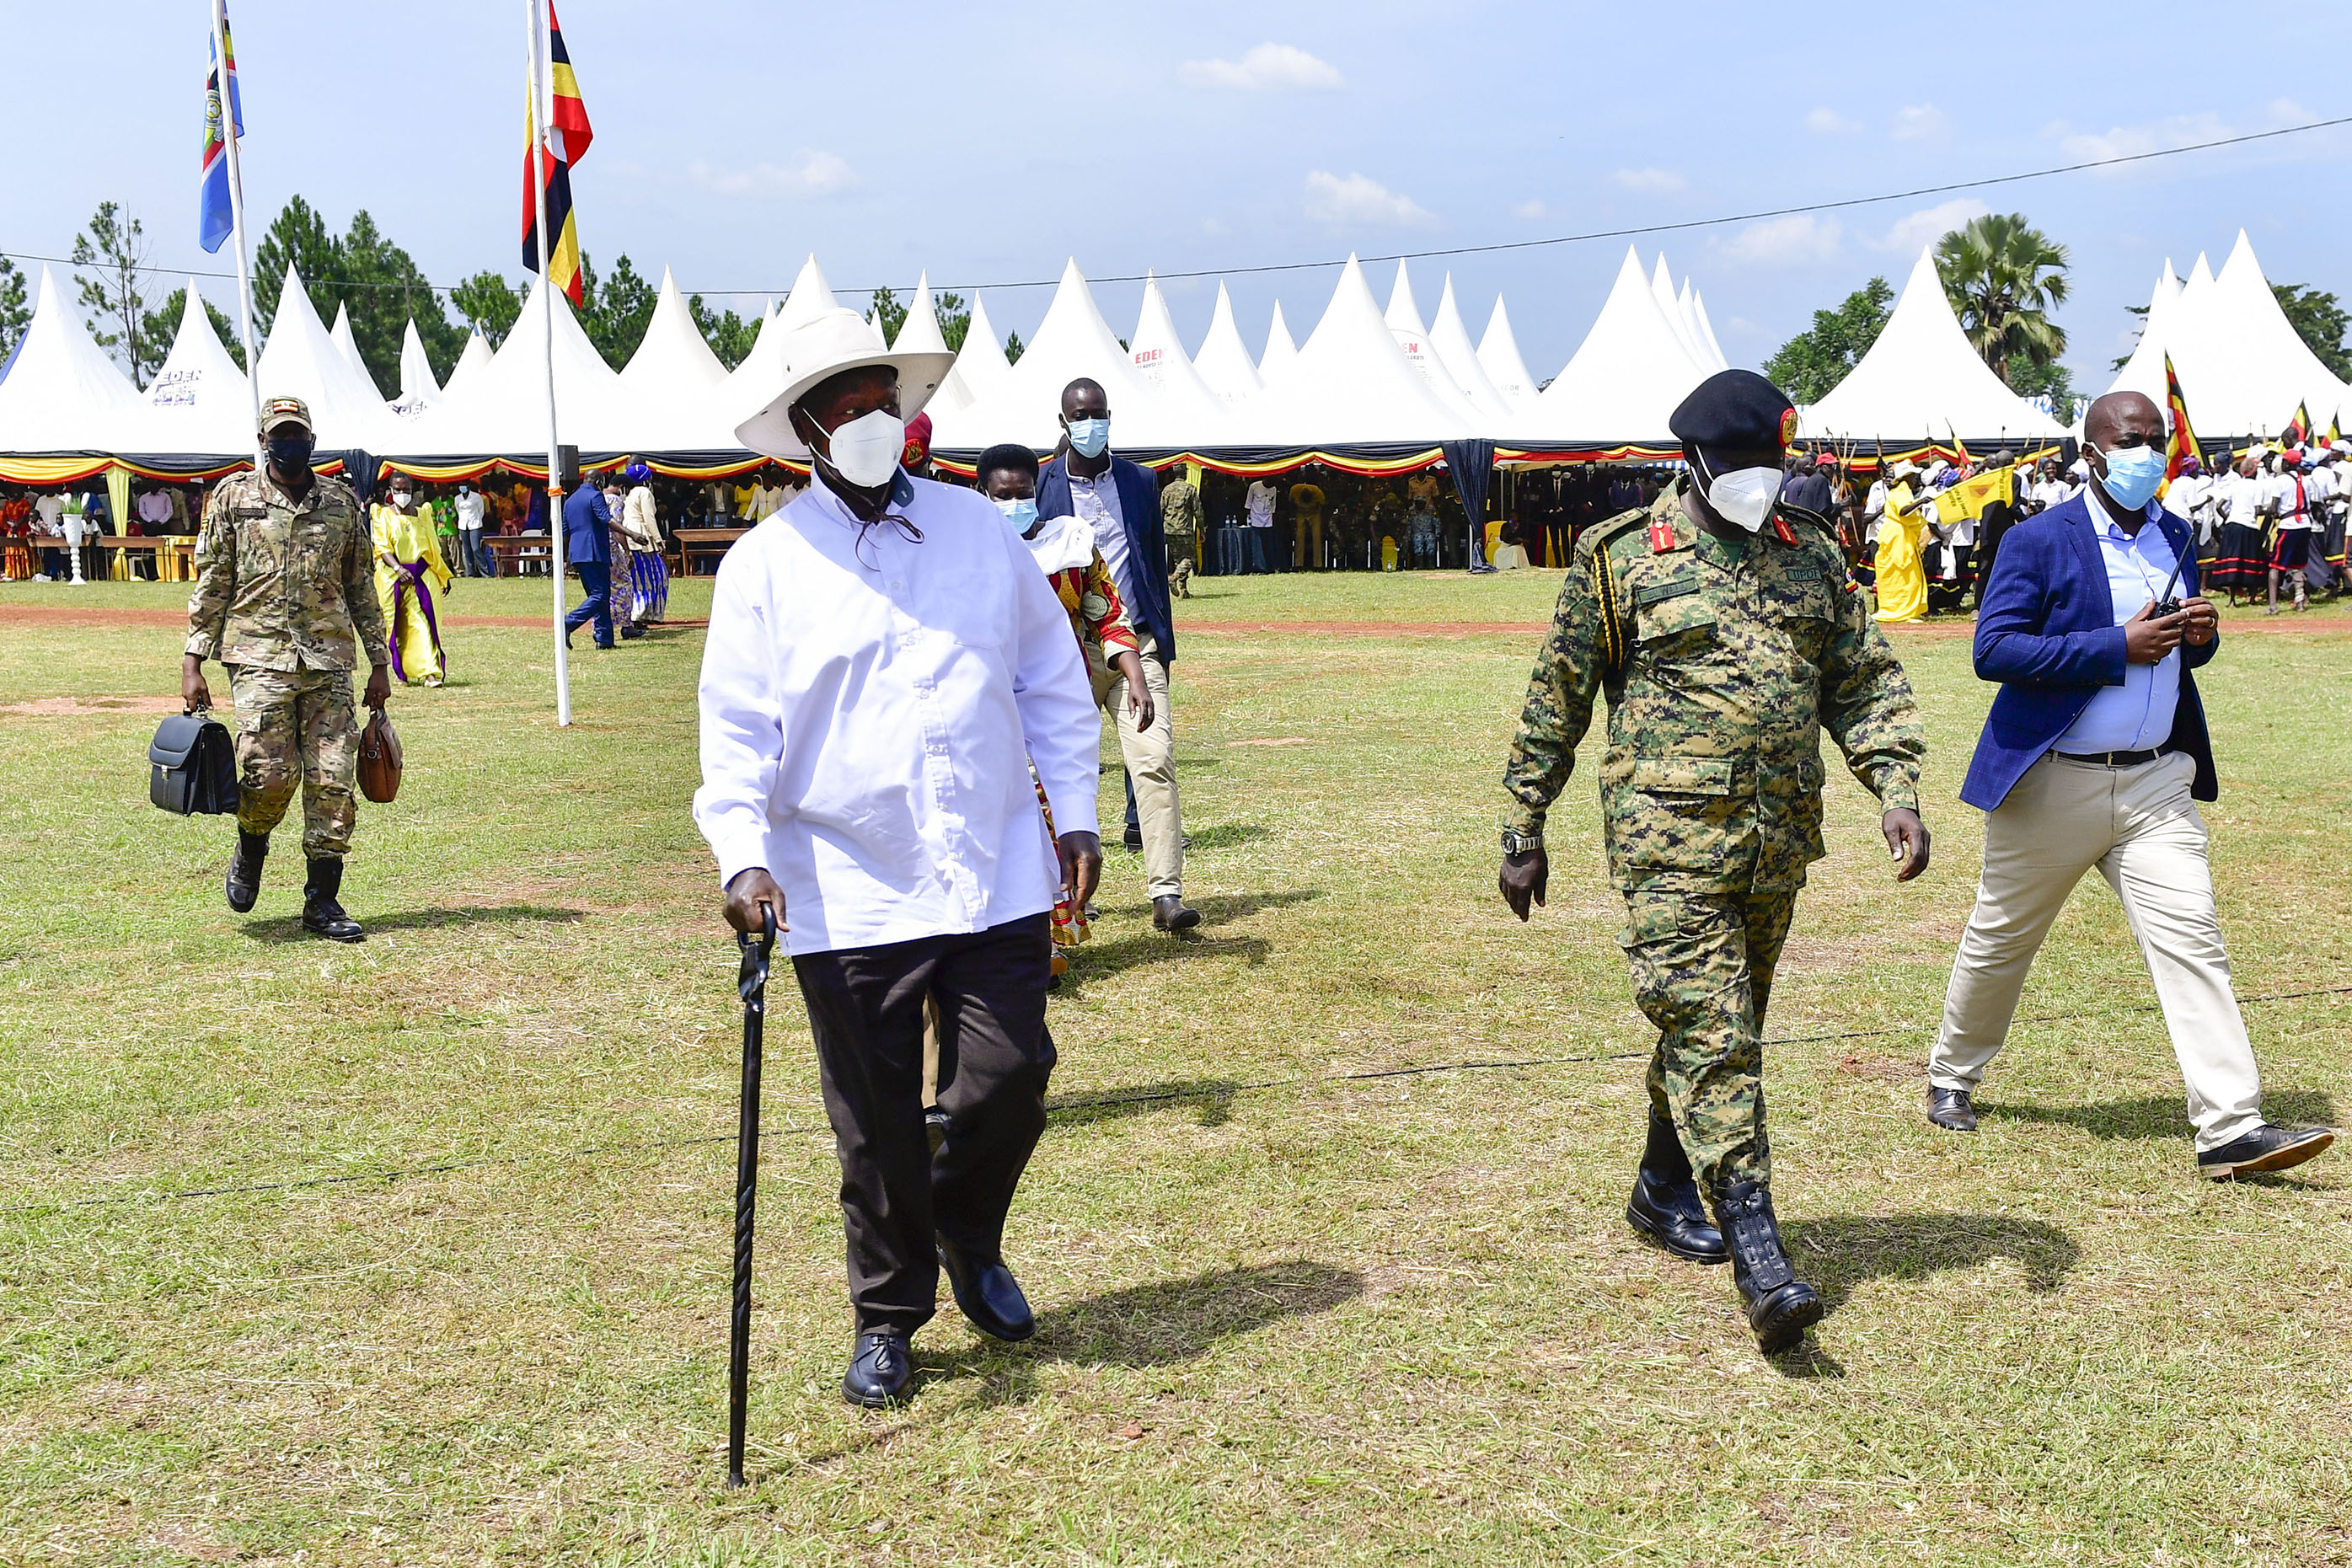 Most of the problems are caused by leaders- Museveni